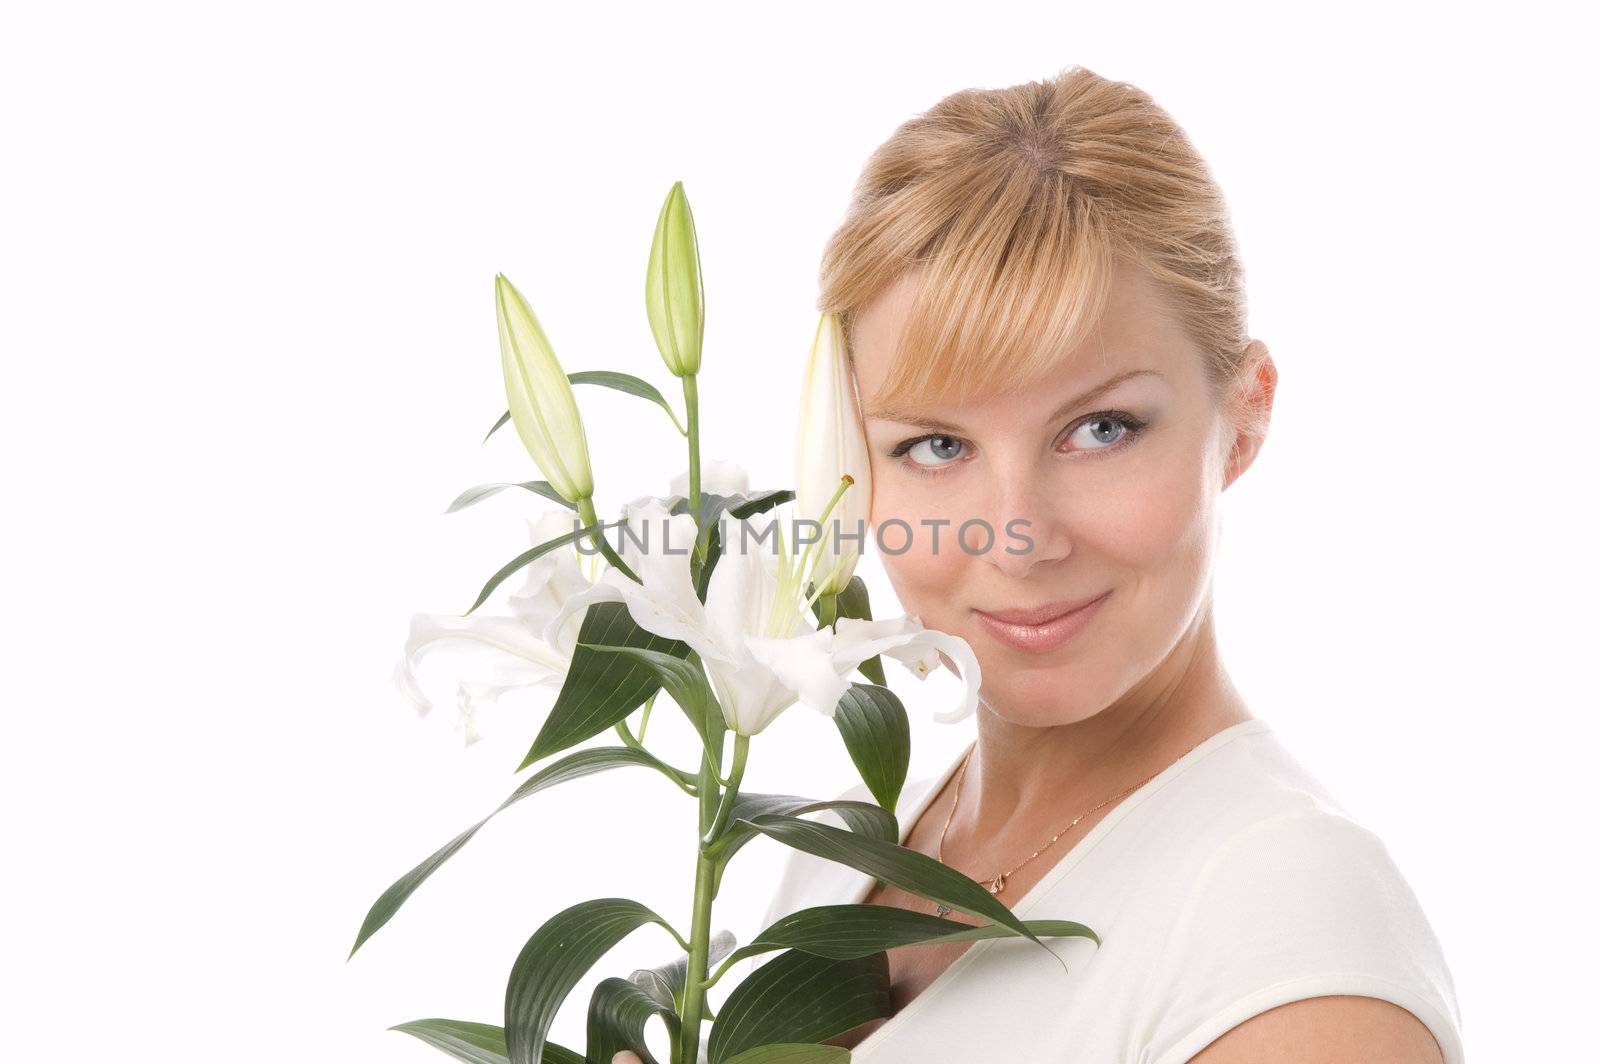 The attractive girl holds a liliy in hands